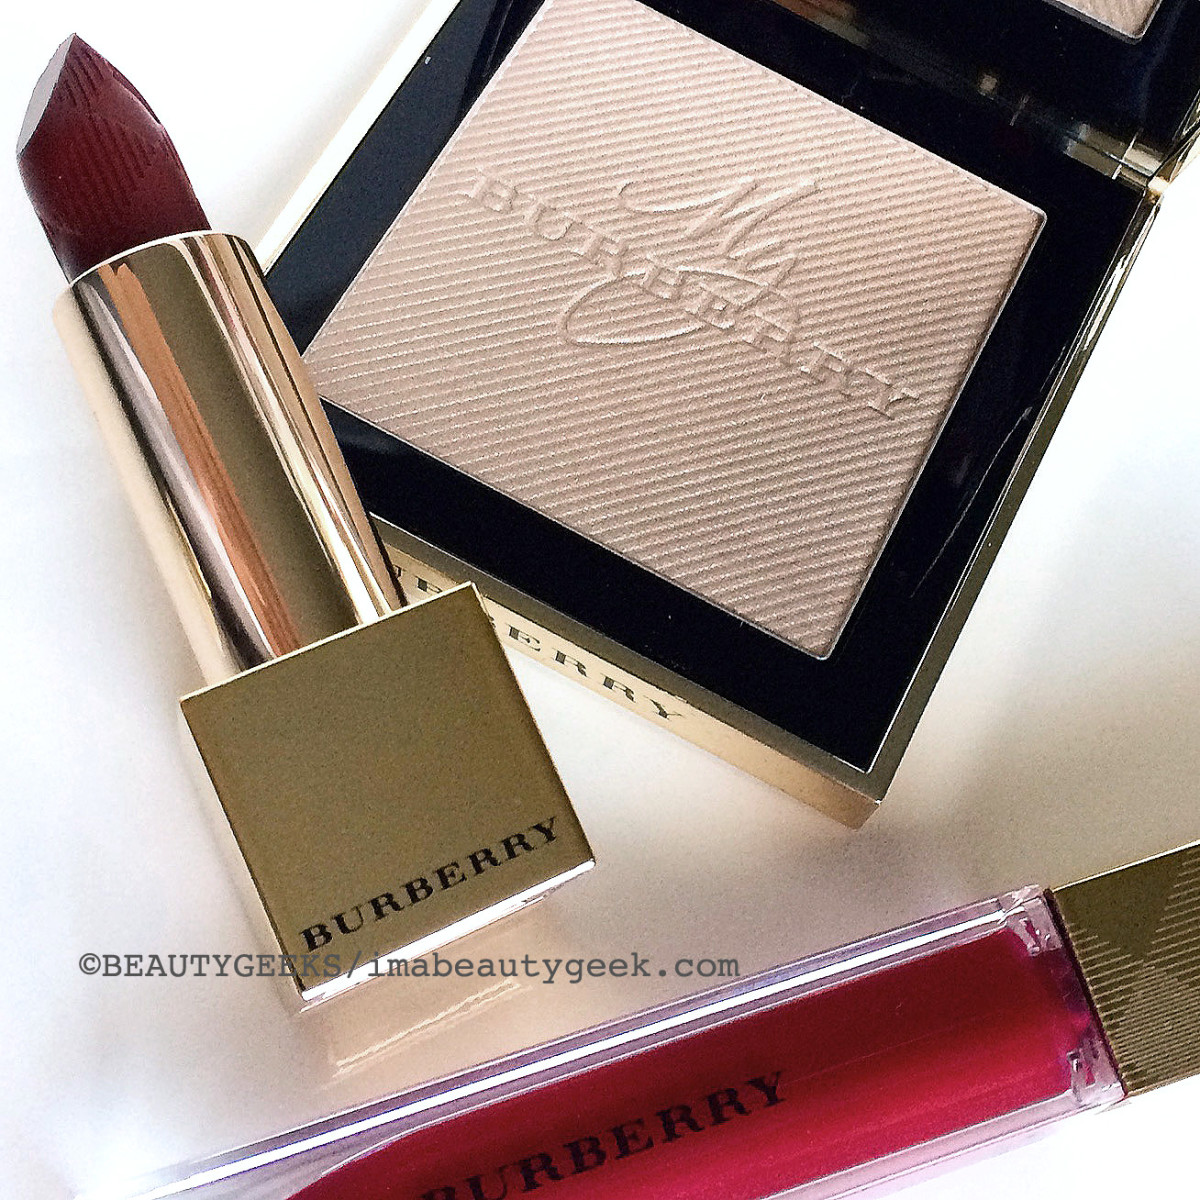 Burberry Winter Glow holiday 2014